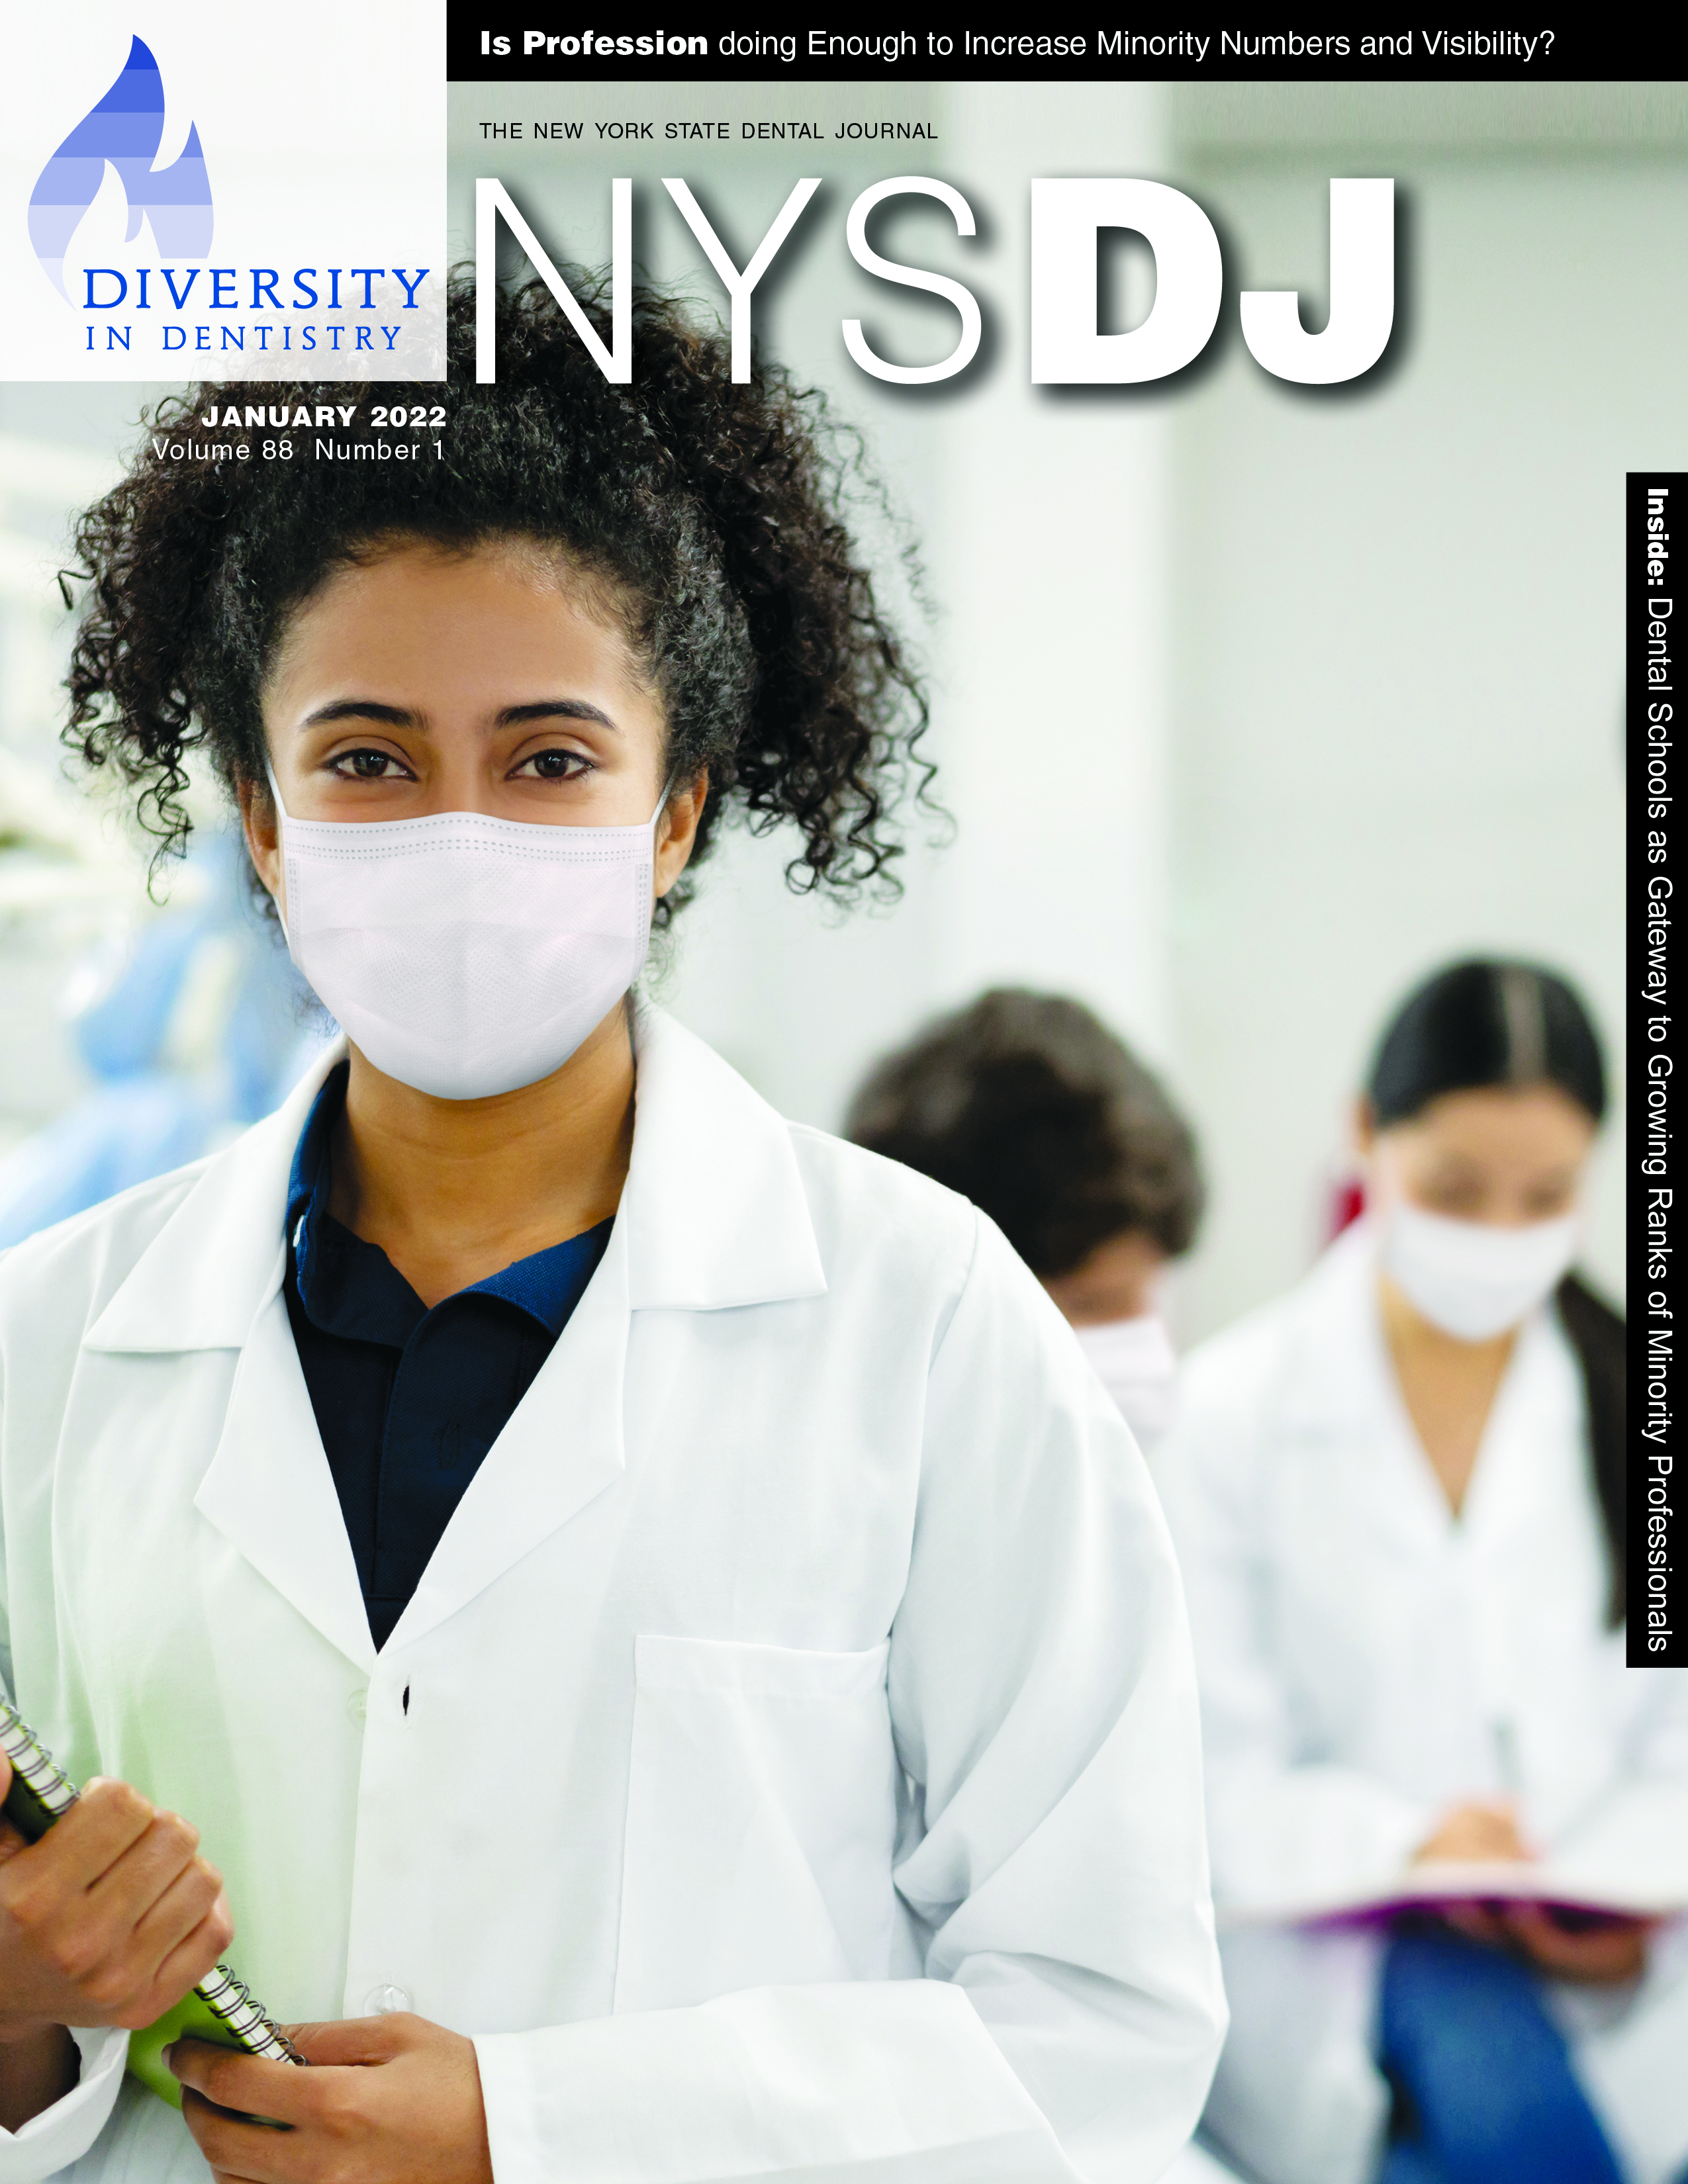 Cover of the NYSDJ with a person in a white coat with a face mask on looking at the camera.